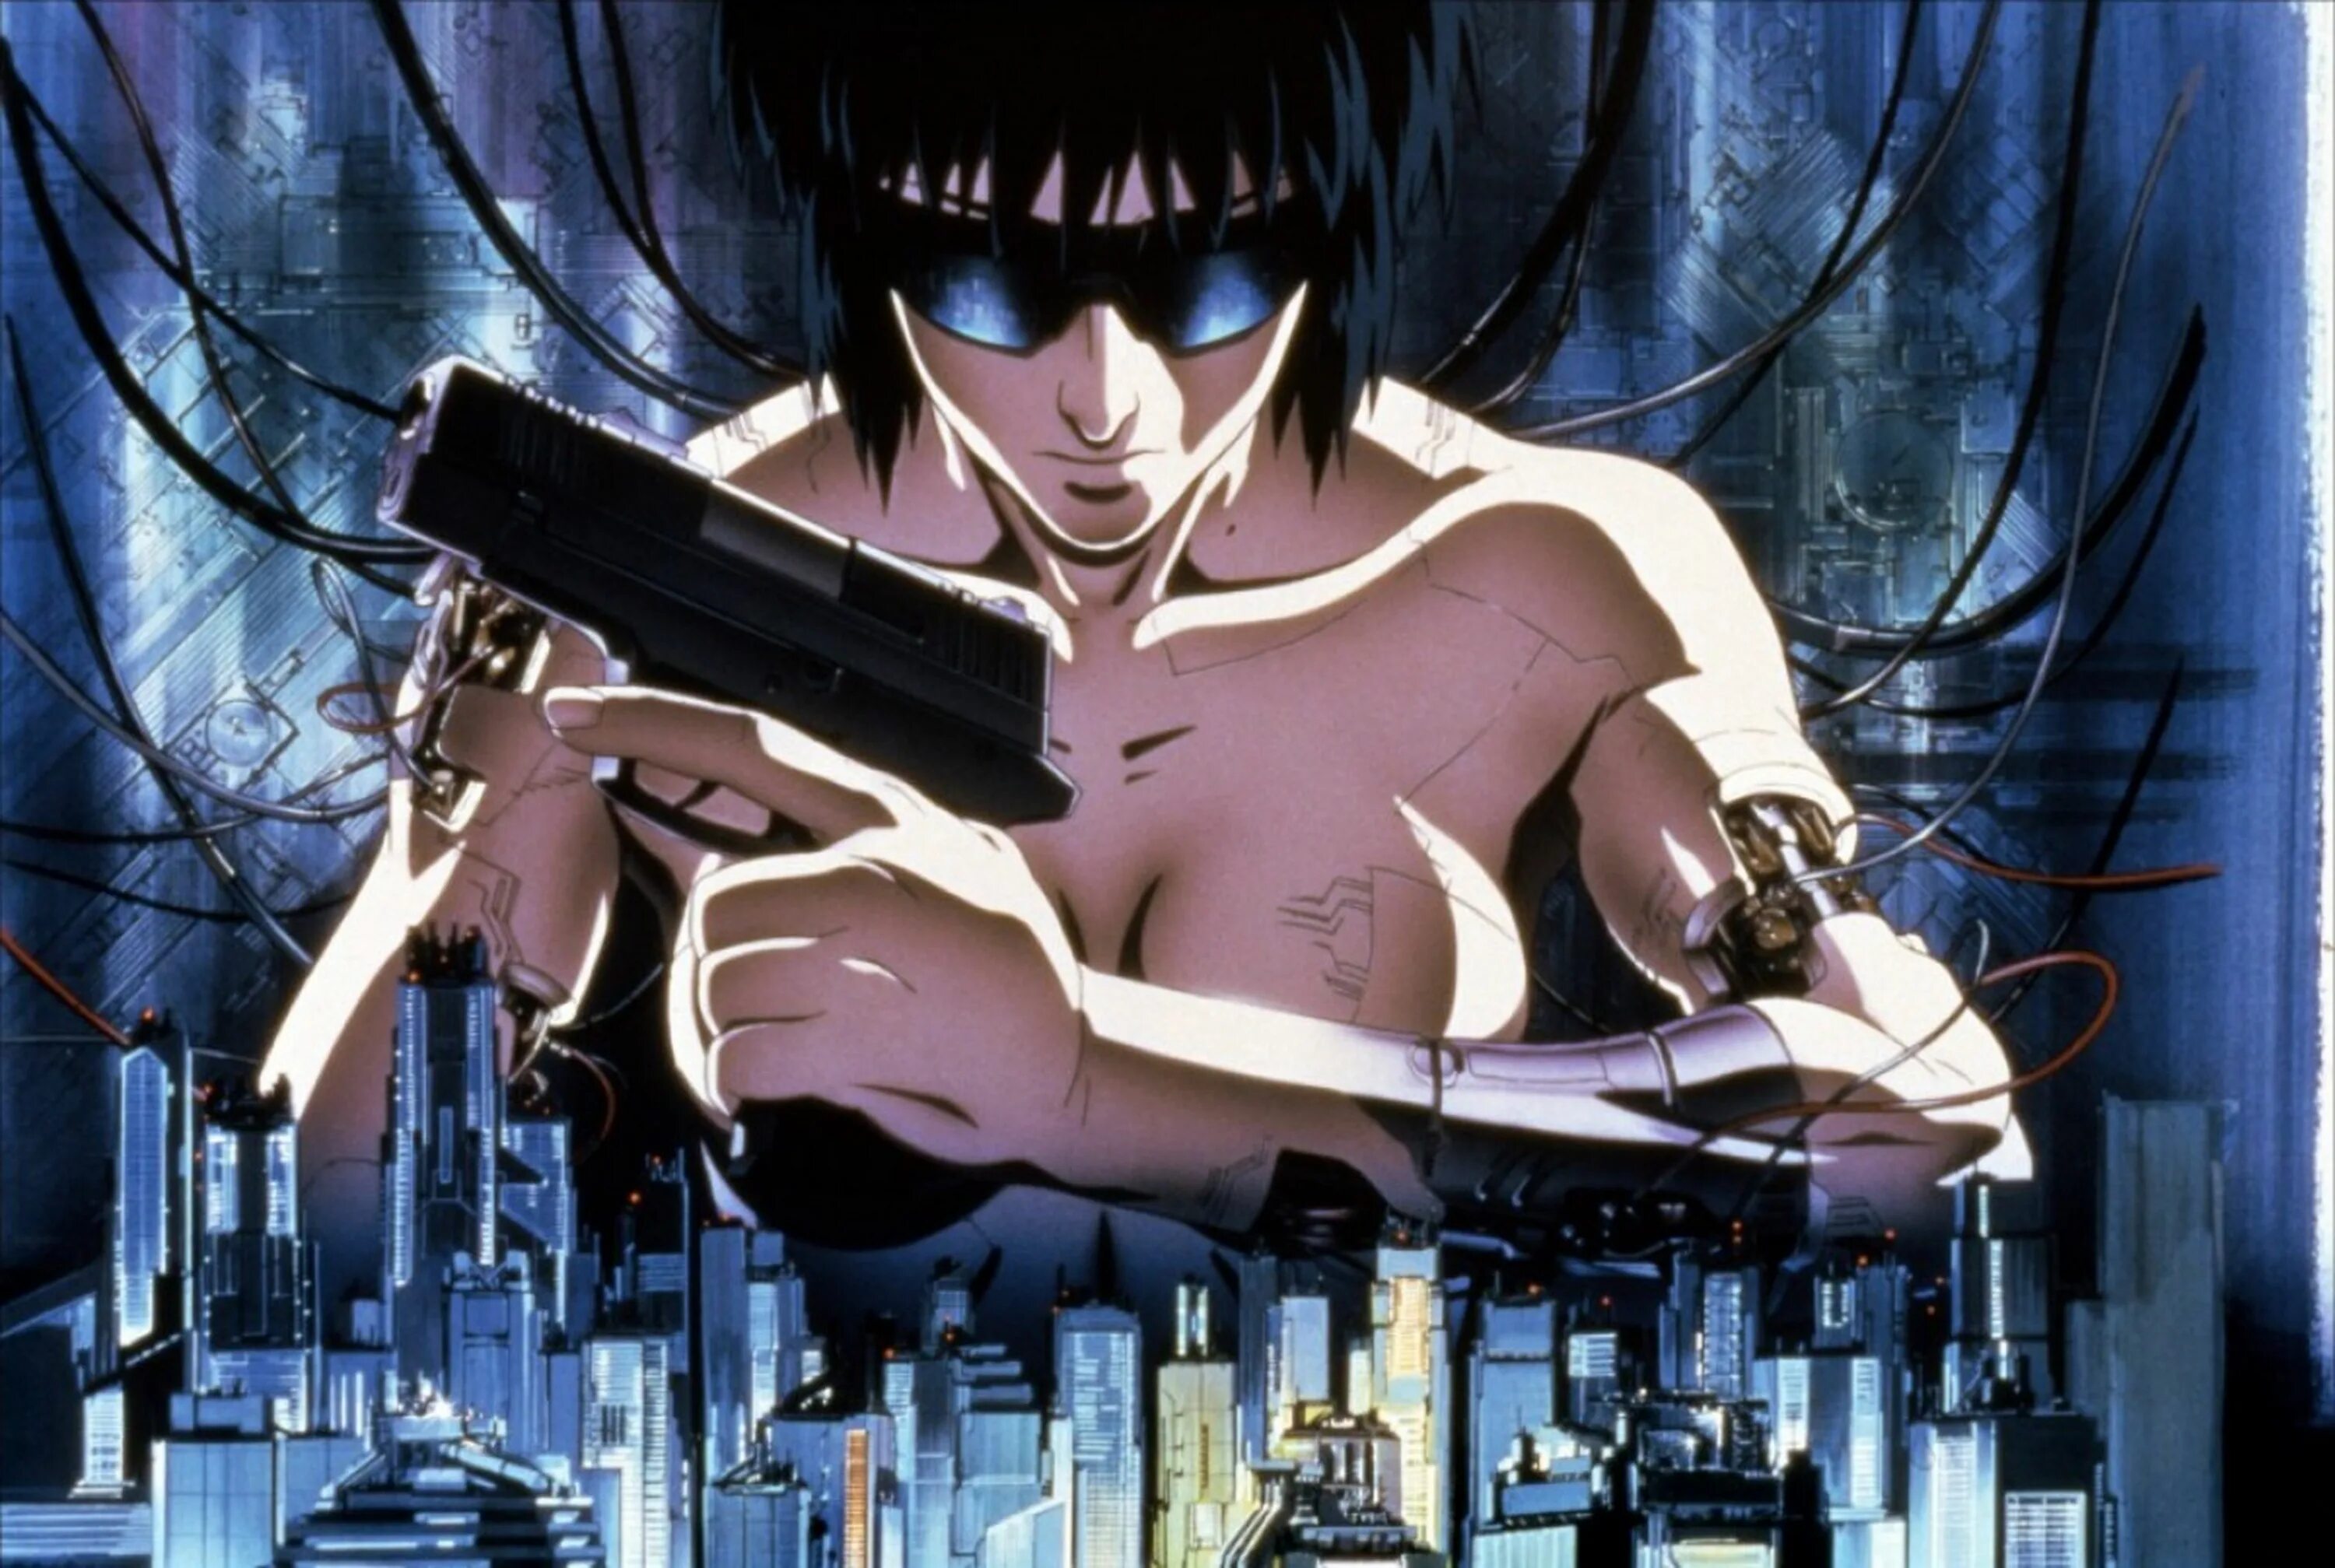 Ghost in the Shell 1995. Кусанаги призрак в доспехах 1995. Призрак в доспехах Мотоко Кусанаги 1995. Gits opening